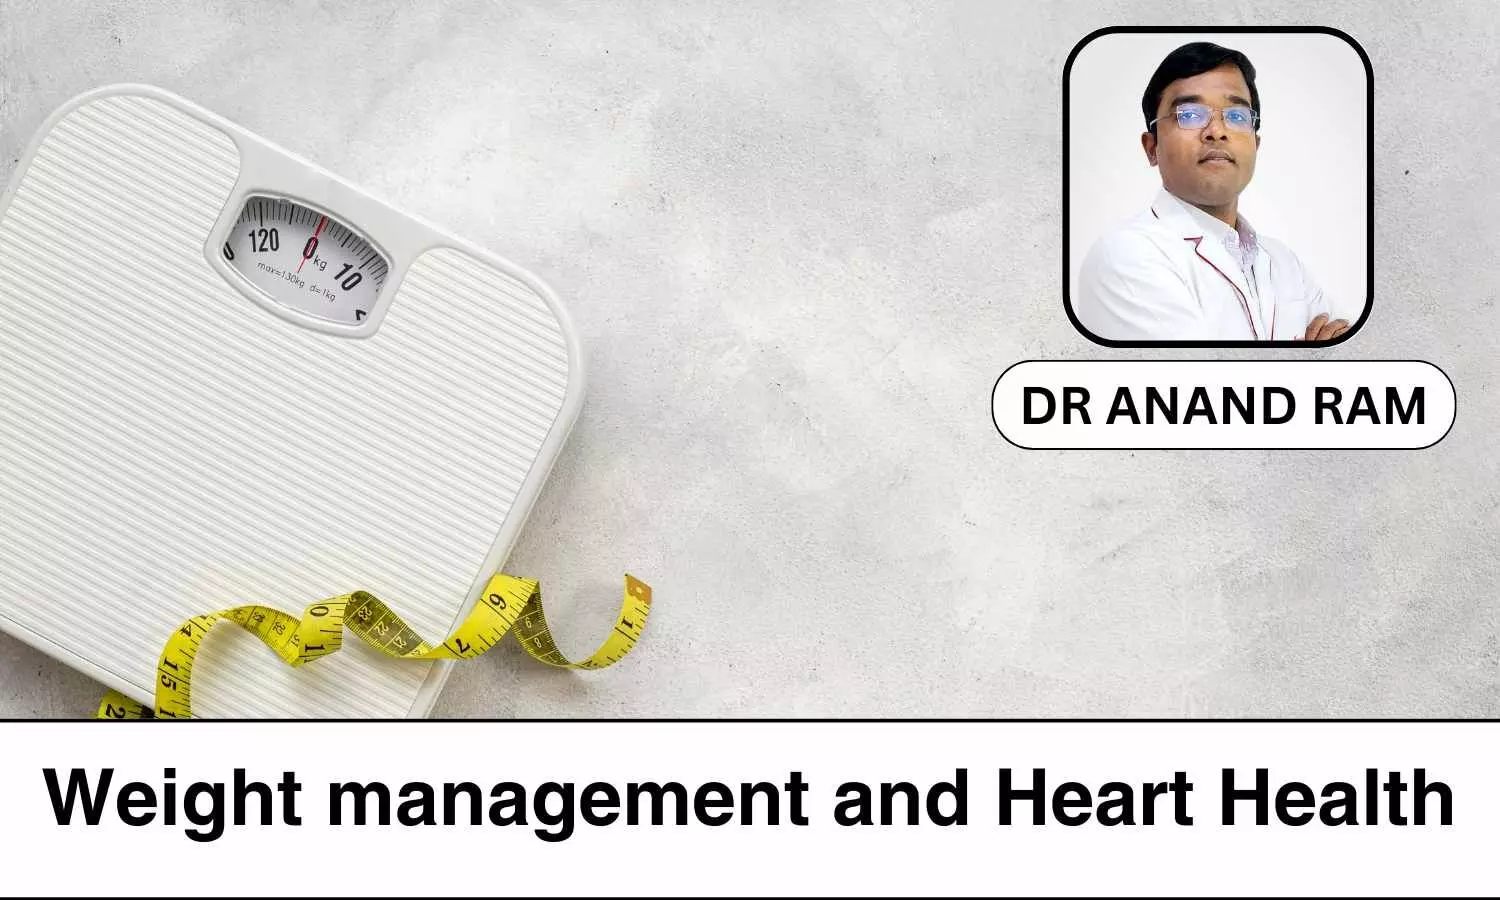 Prioritizing Heart Health through Weight Management - Dr Anand Ram